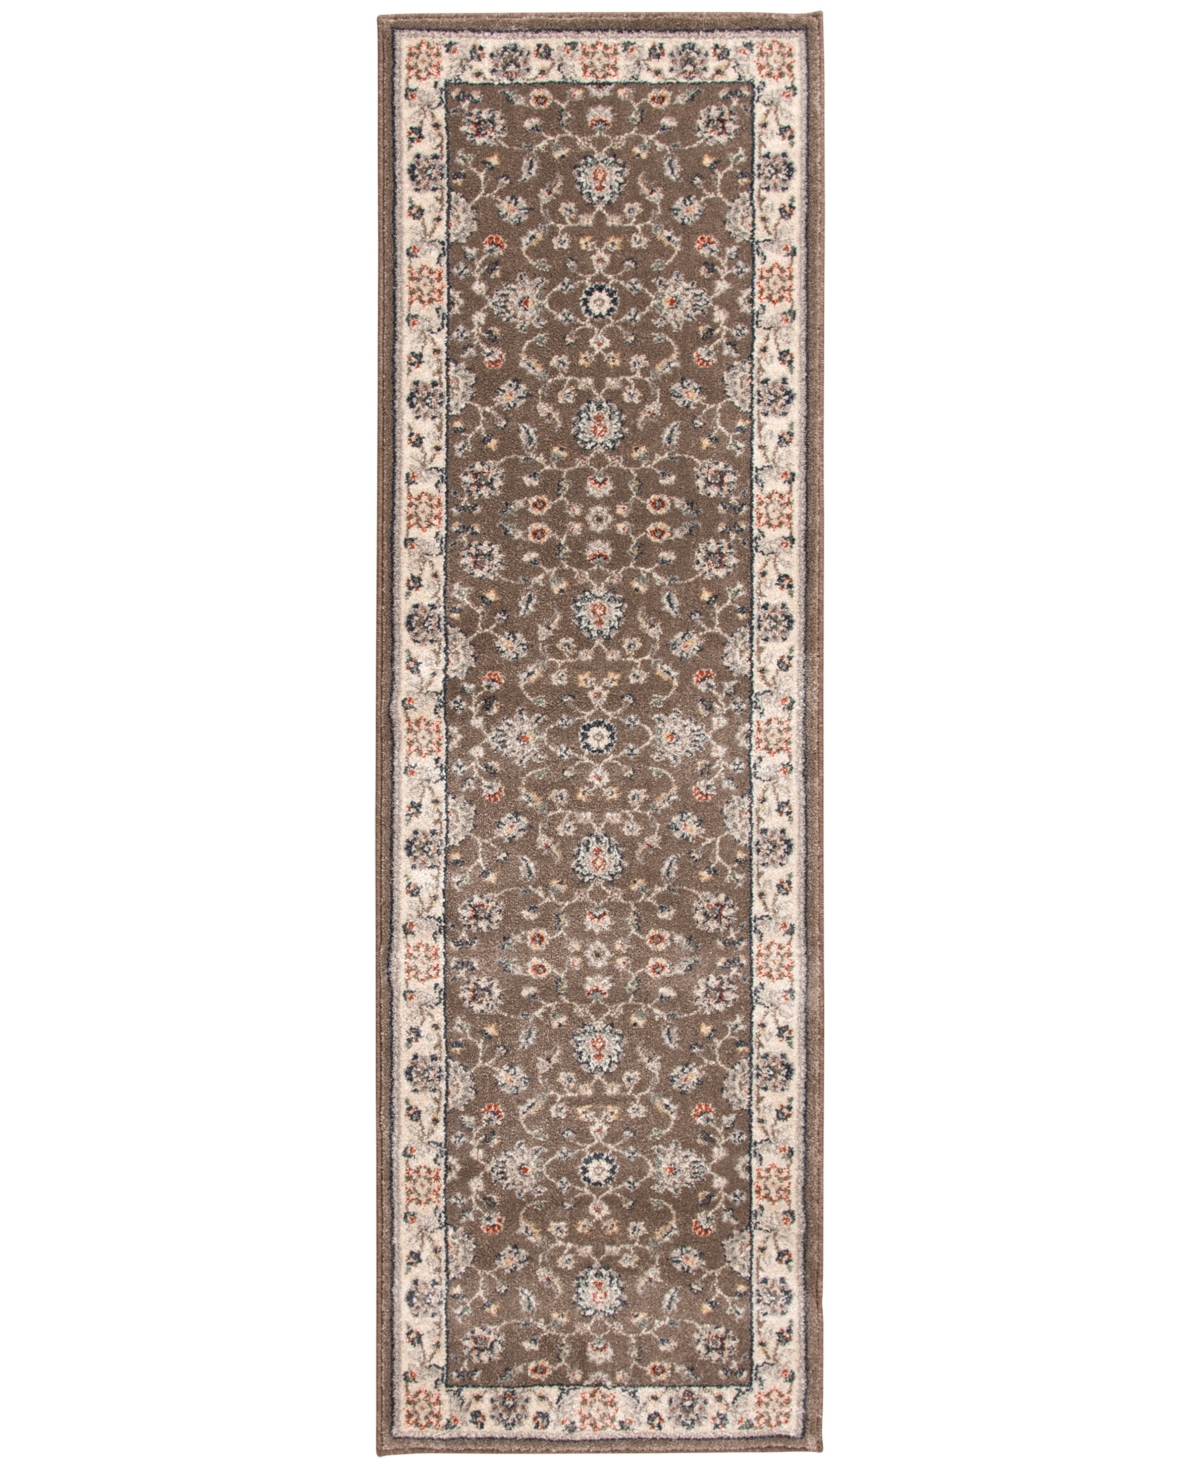 Km Home Poise Pse-7203 2'3" X 7'7" Runner Area Rug In Coffee